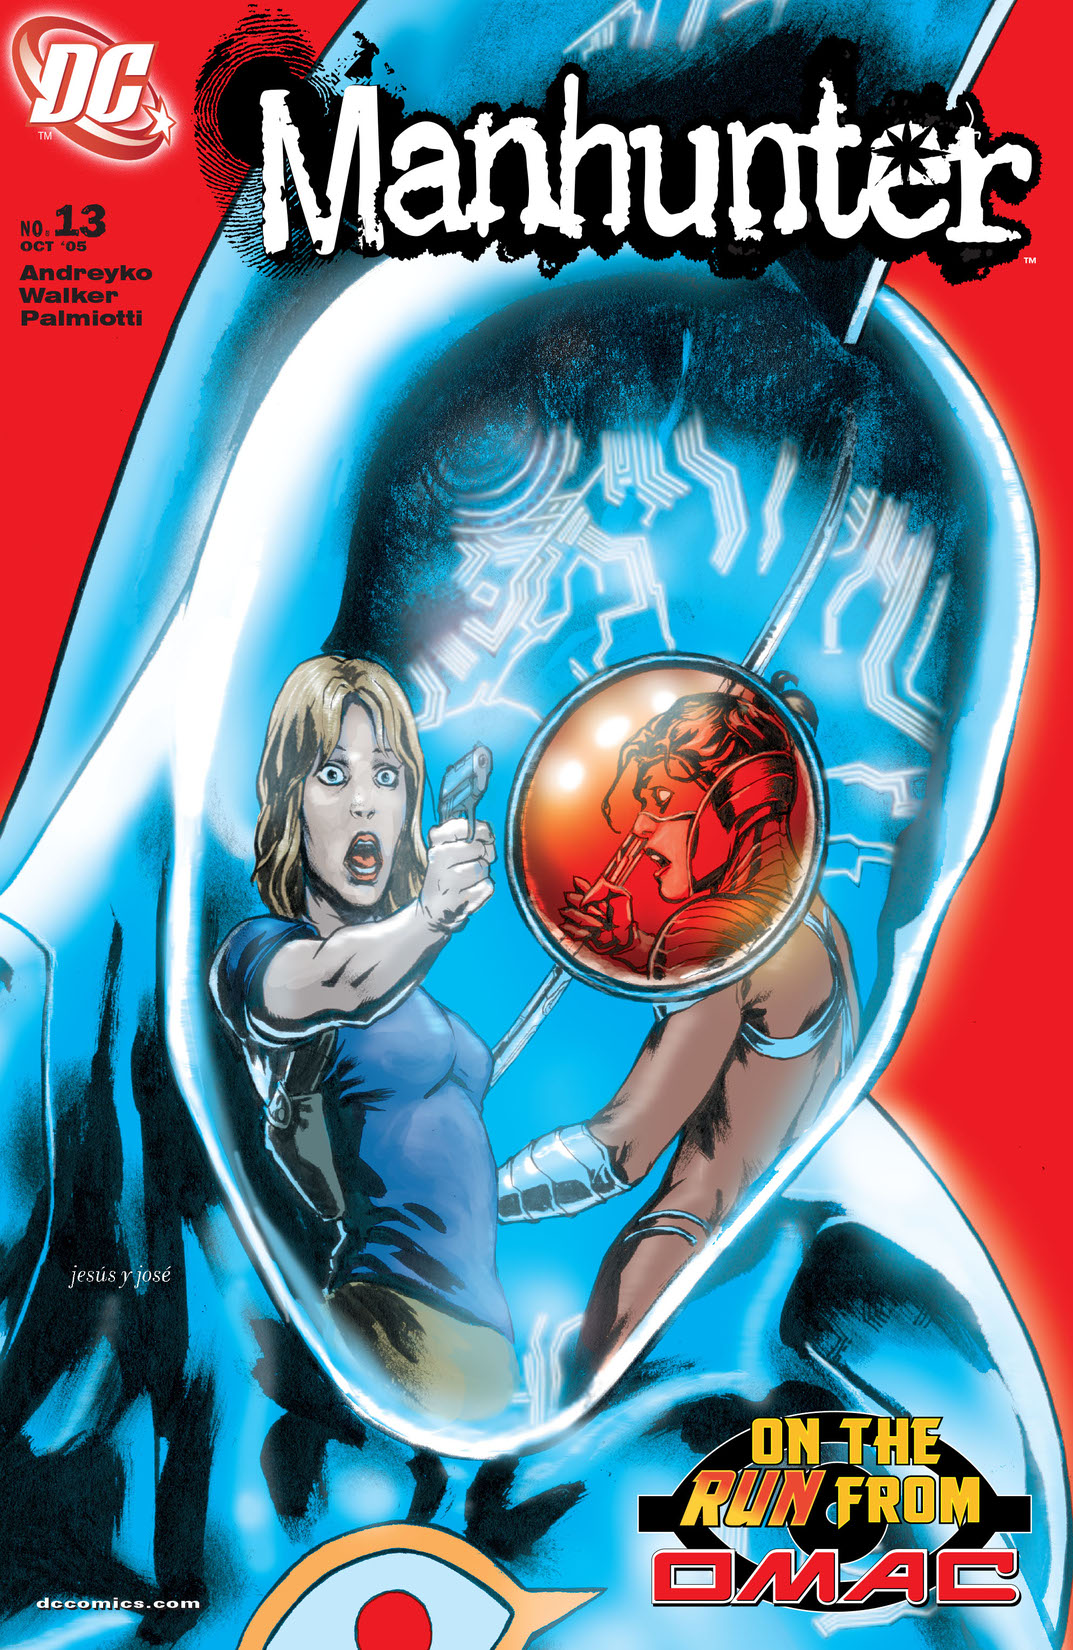 Manhunter (2004-) #13 preview images